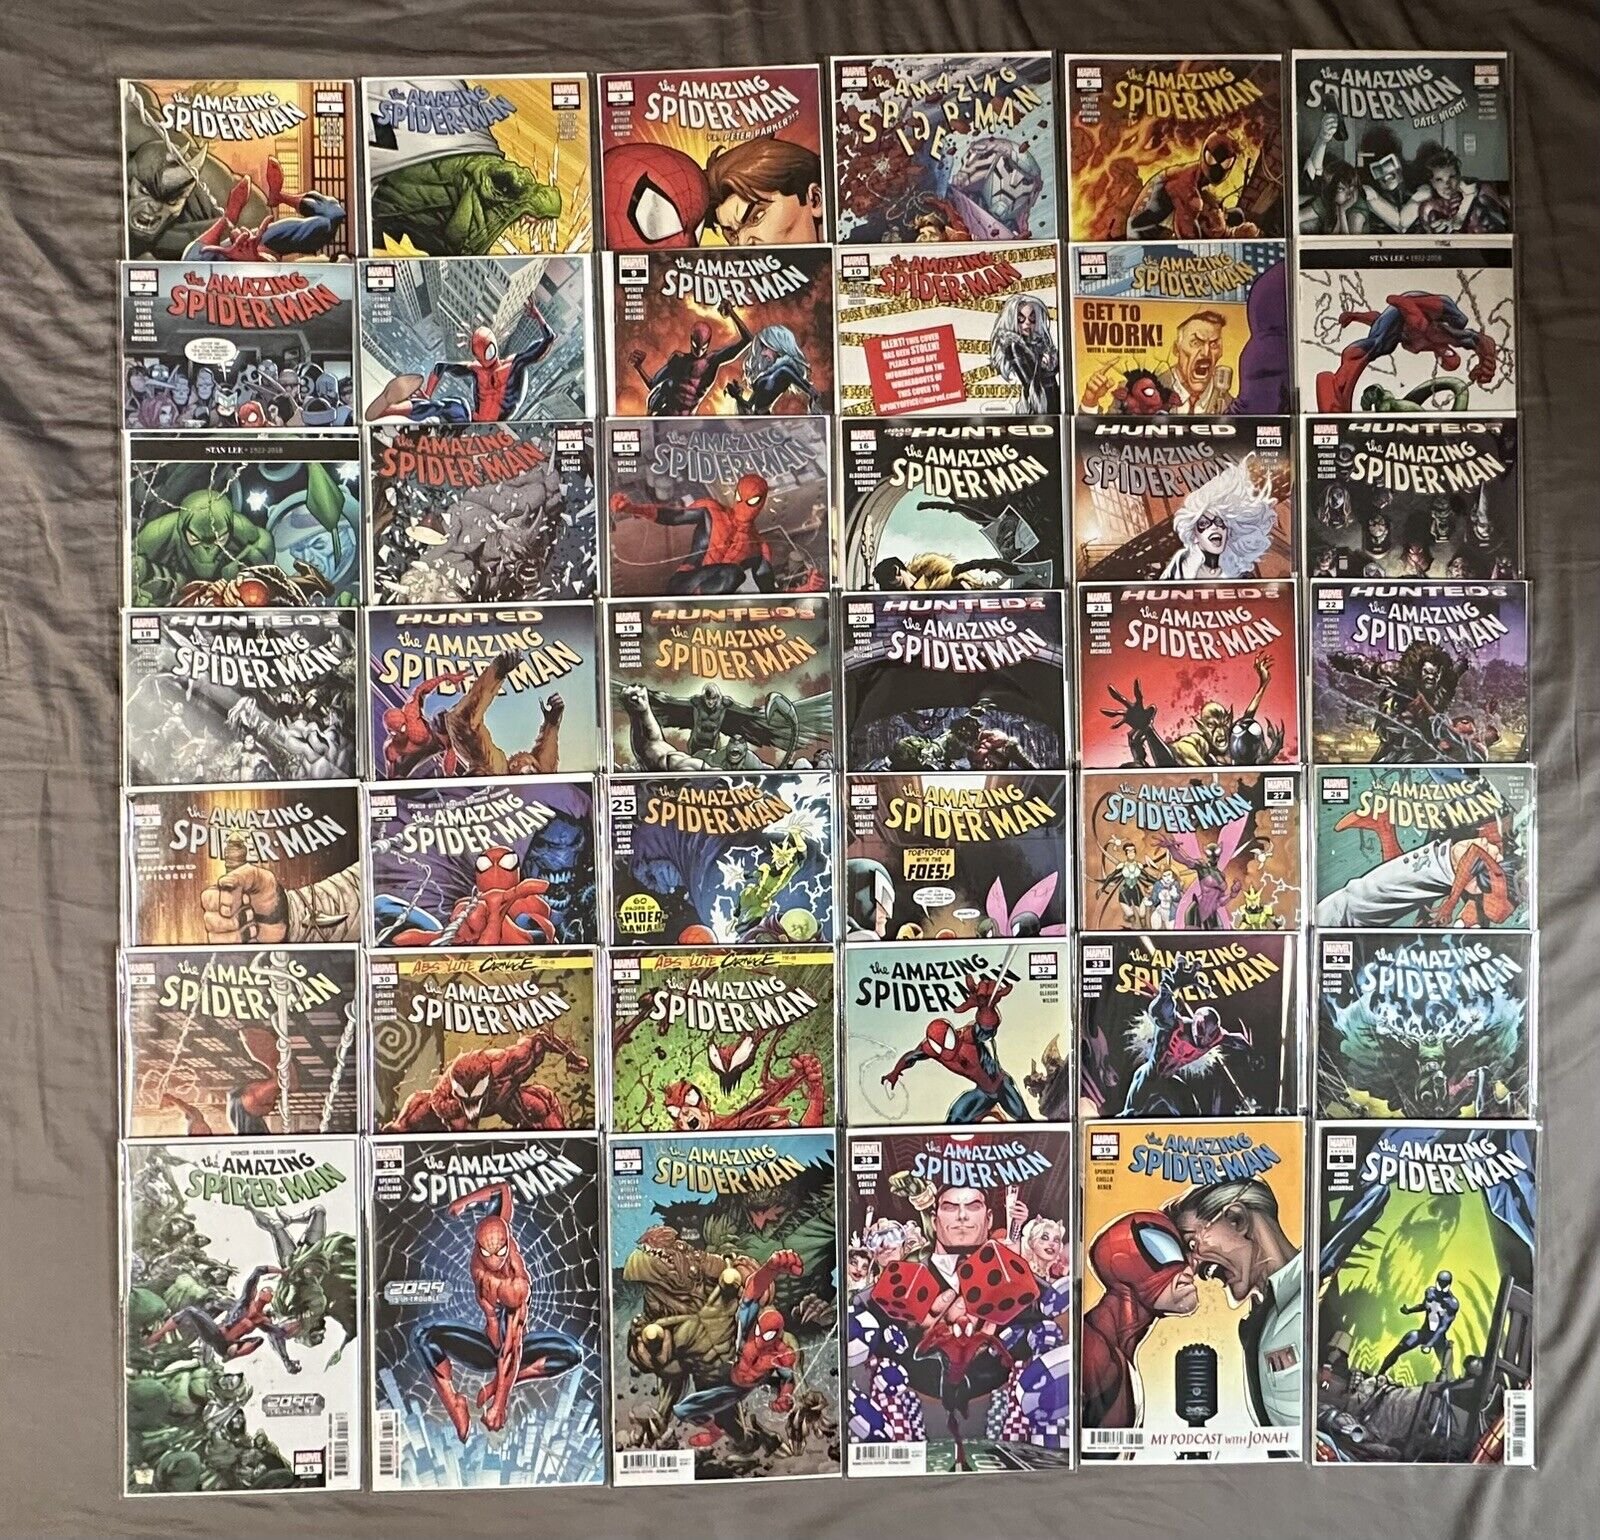 The Amazing Spider-Man Vol. 5 2019 Comic Lot #1-39 LGY 802-840 + Annual 1 LGY 43